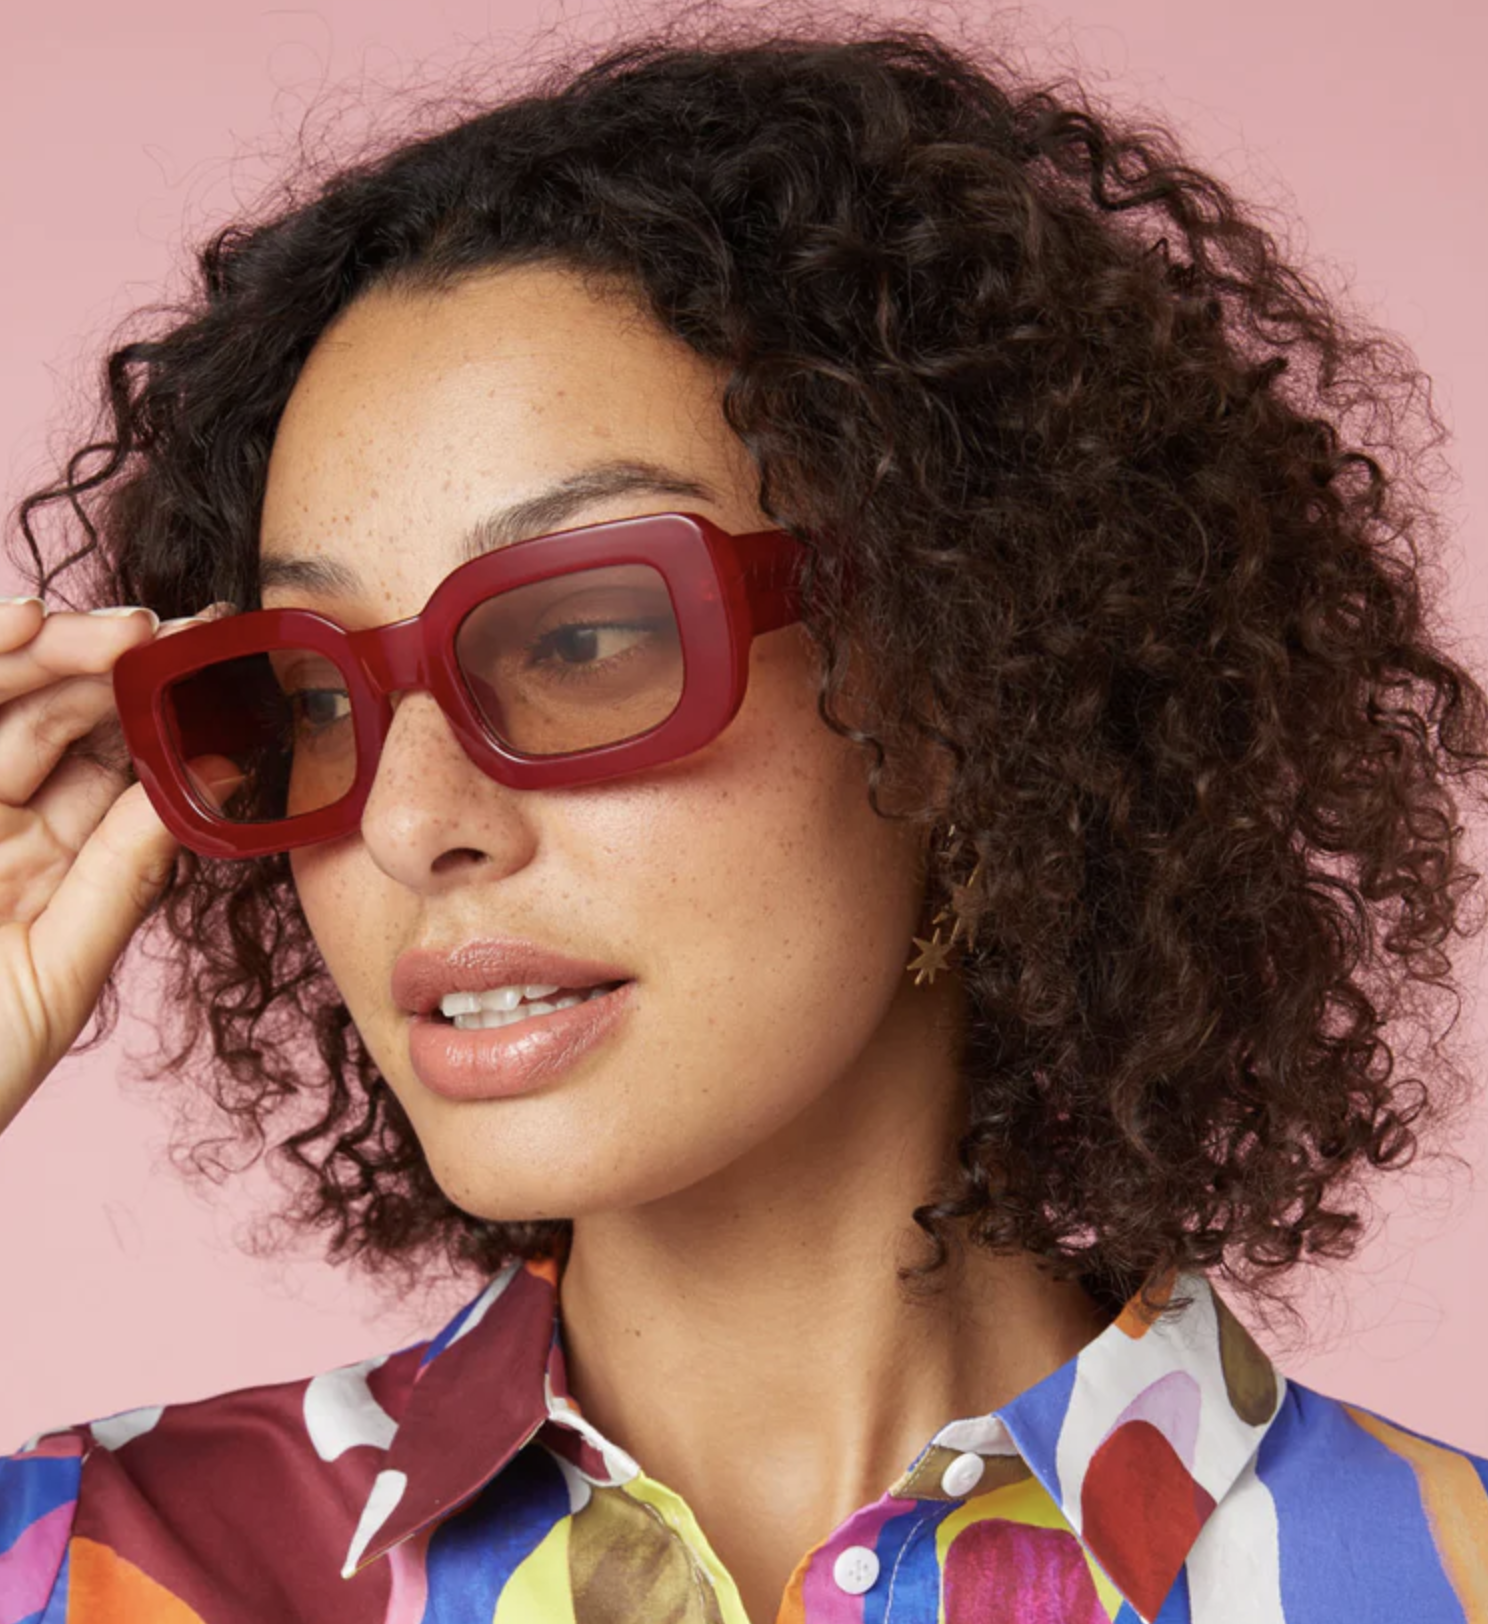 Woman with curly hair, adjusting oversized glasses, wearing a printed shirt